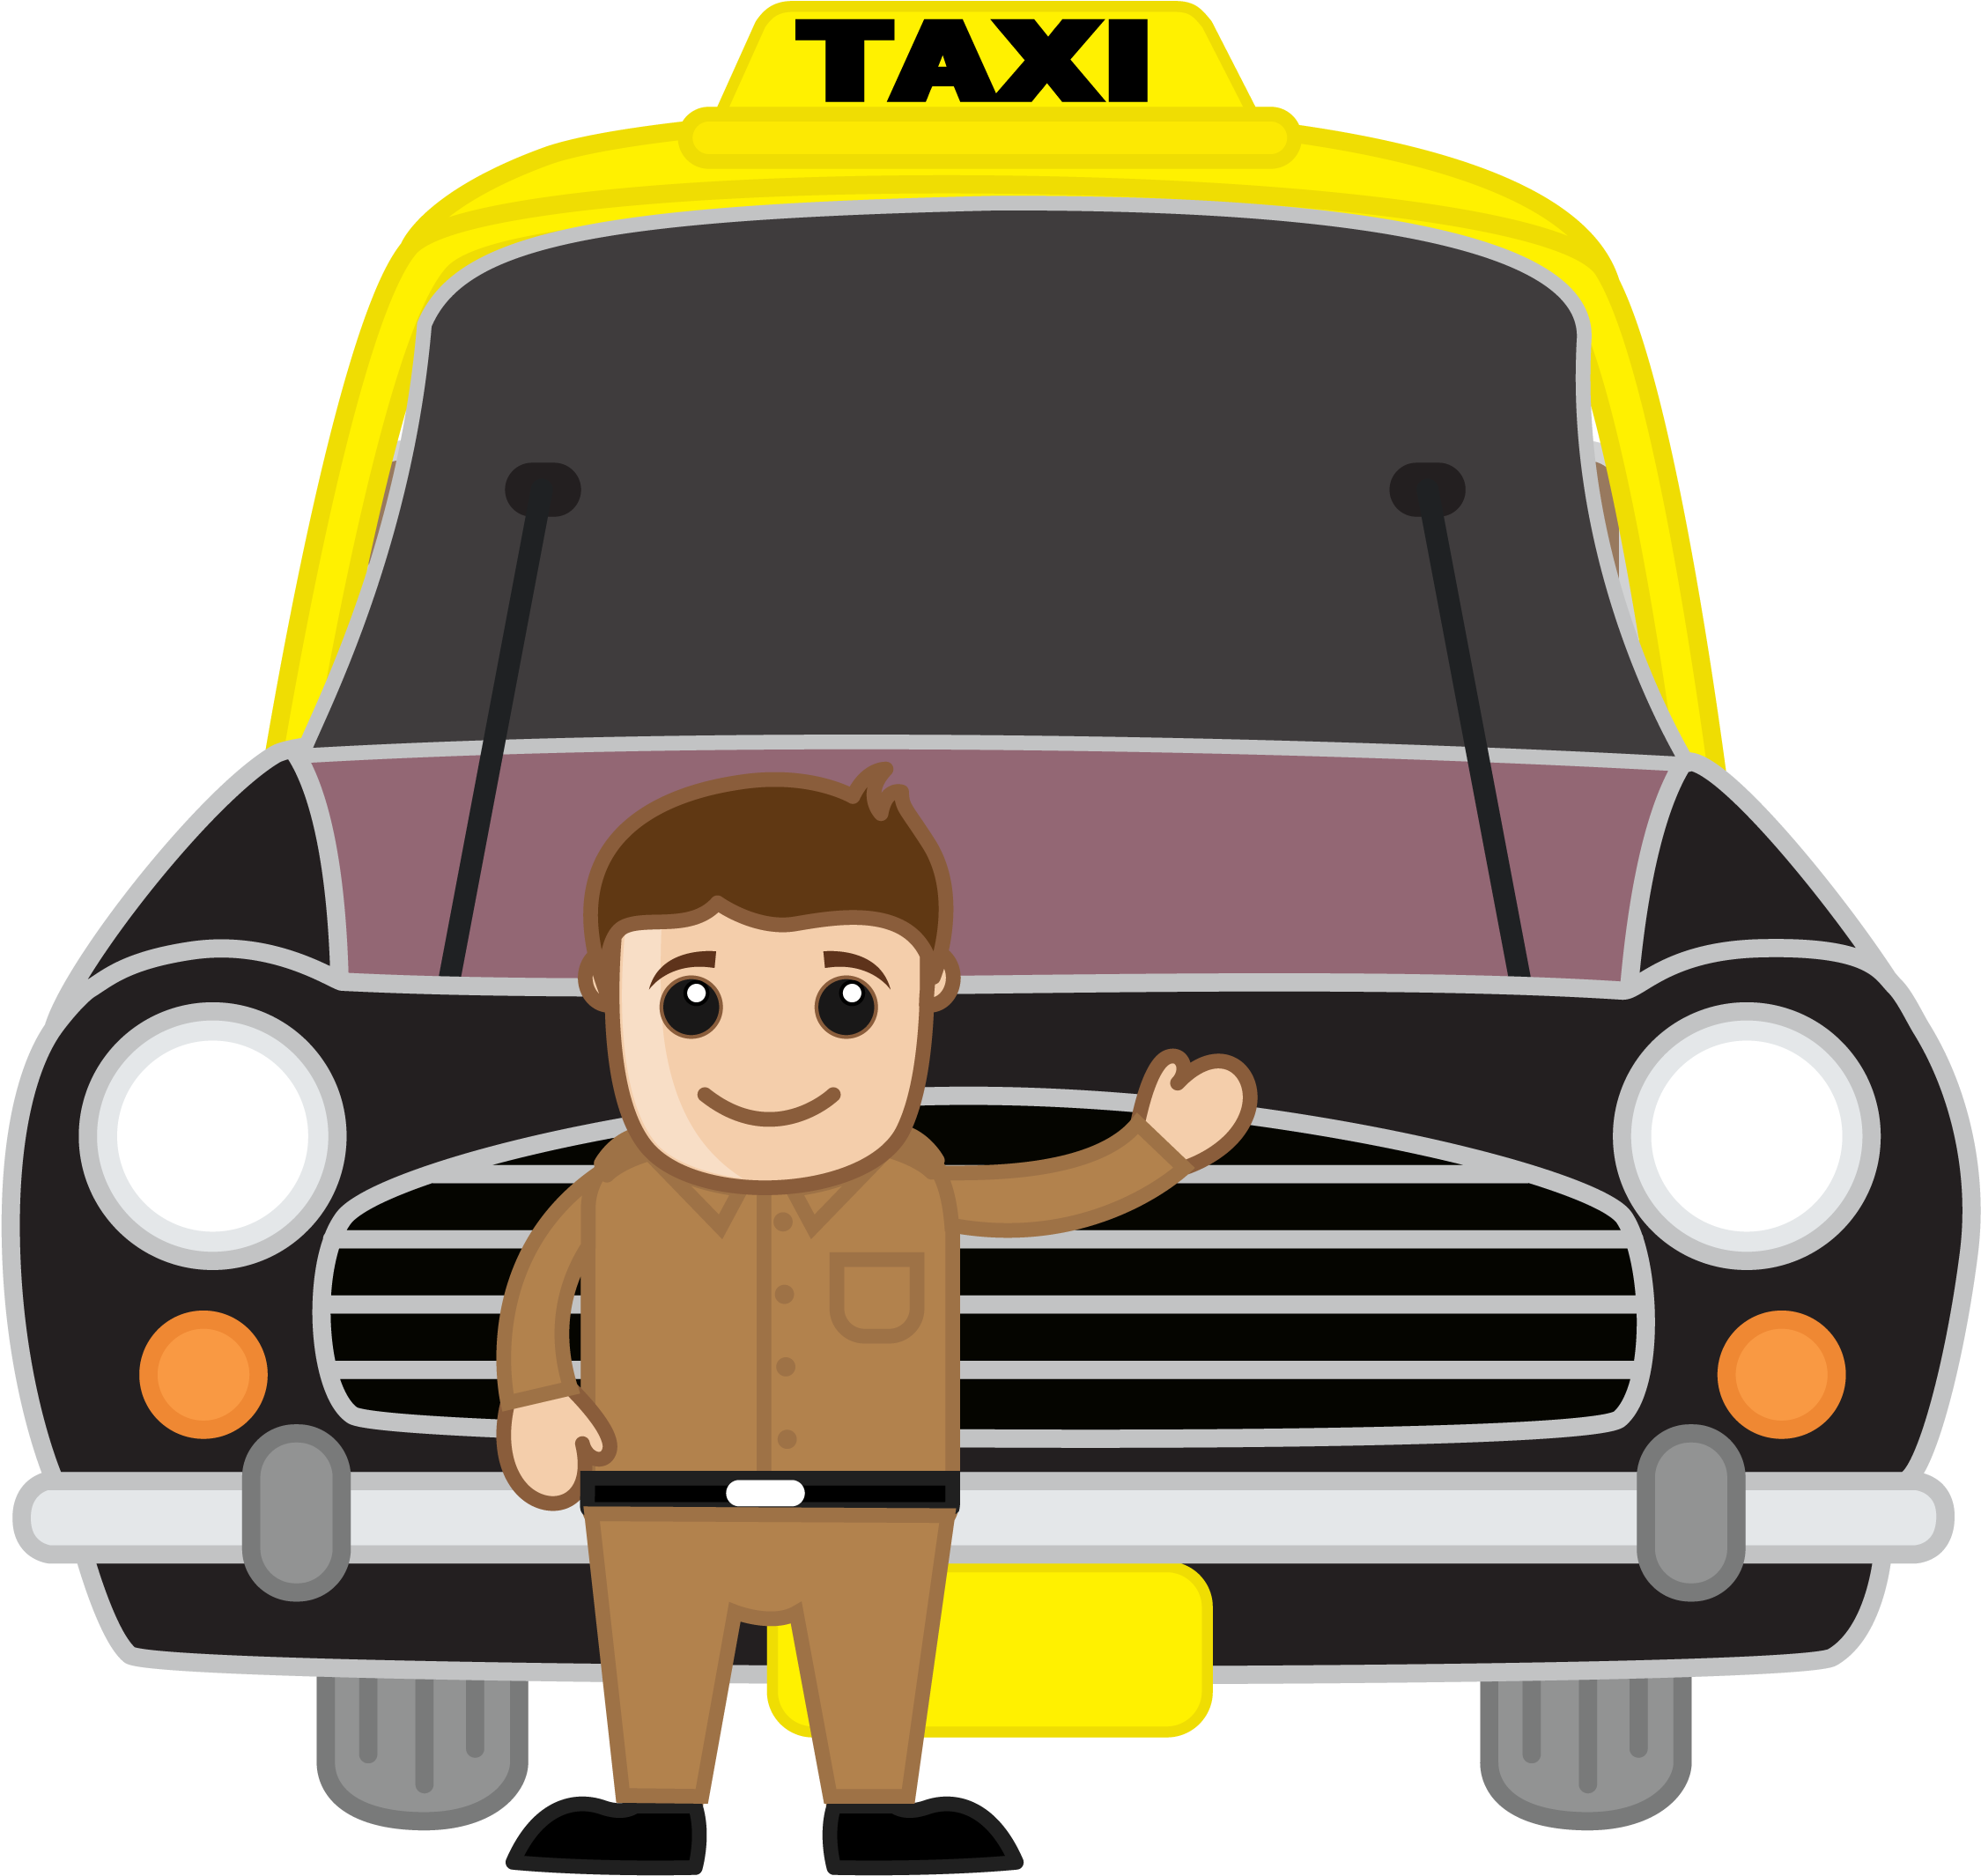 Taxifahrer PNG Image HD